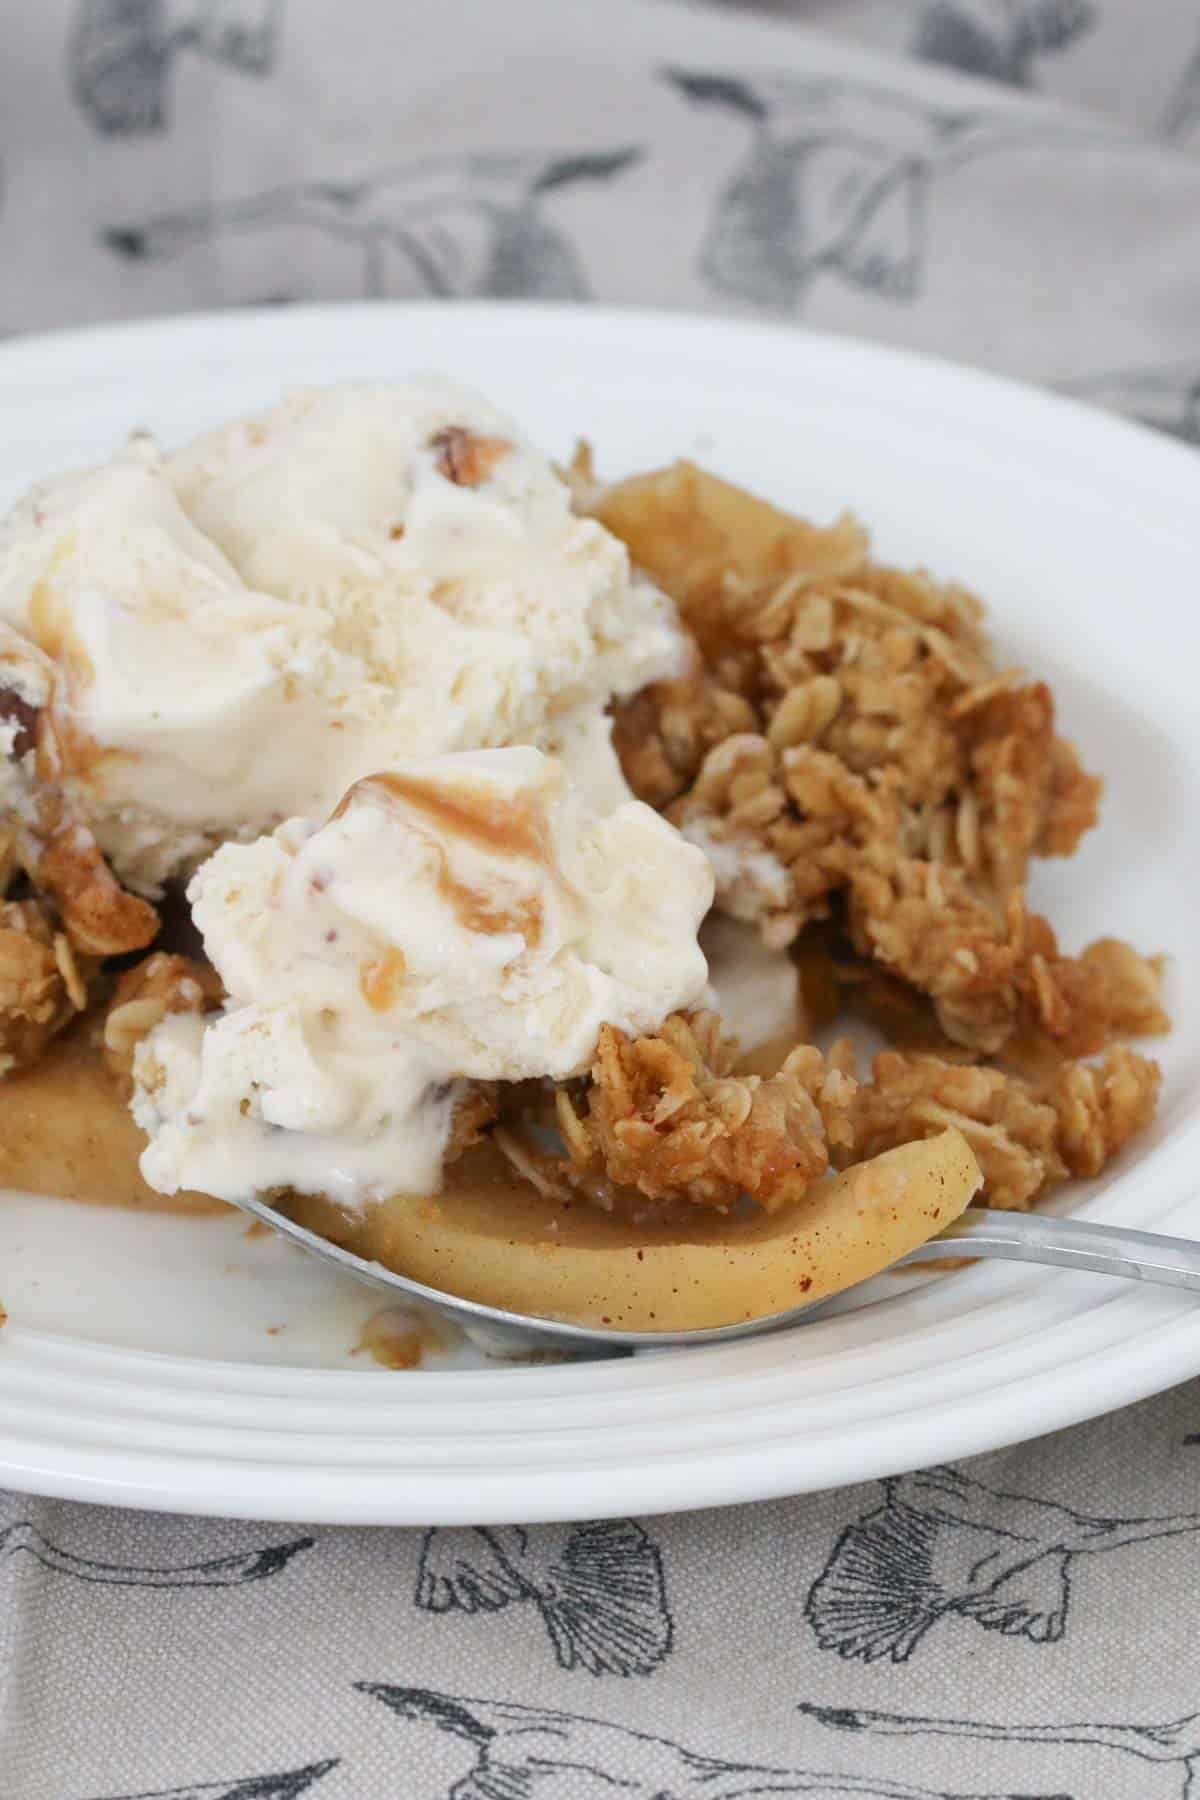 A spoonful of apple crisp with ice-cream.